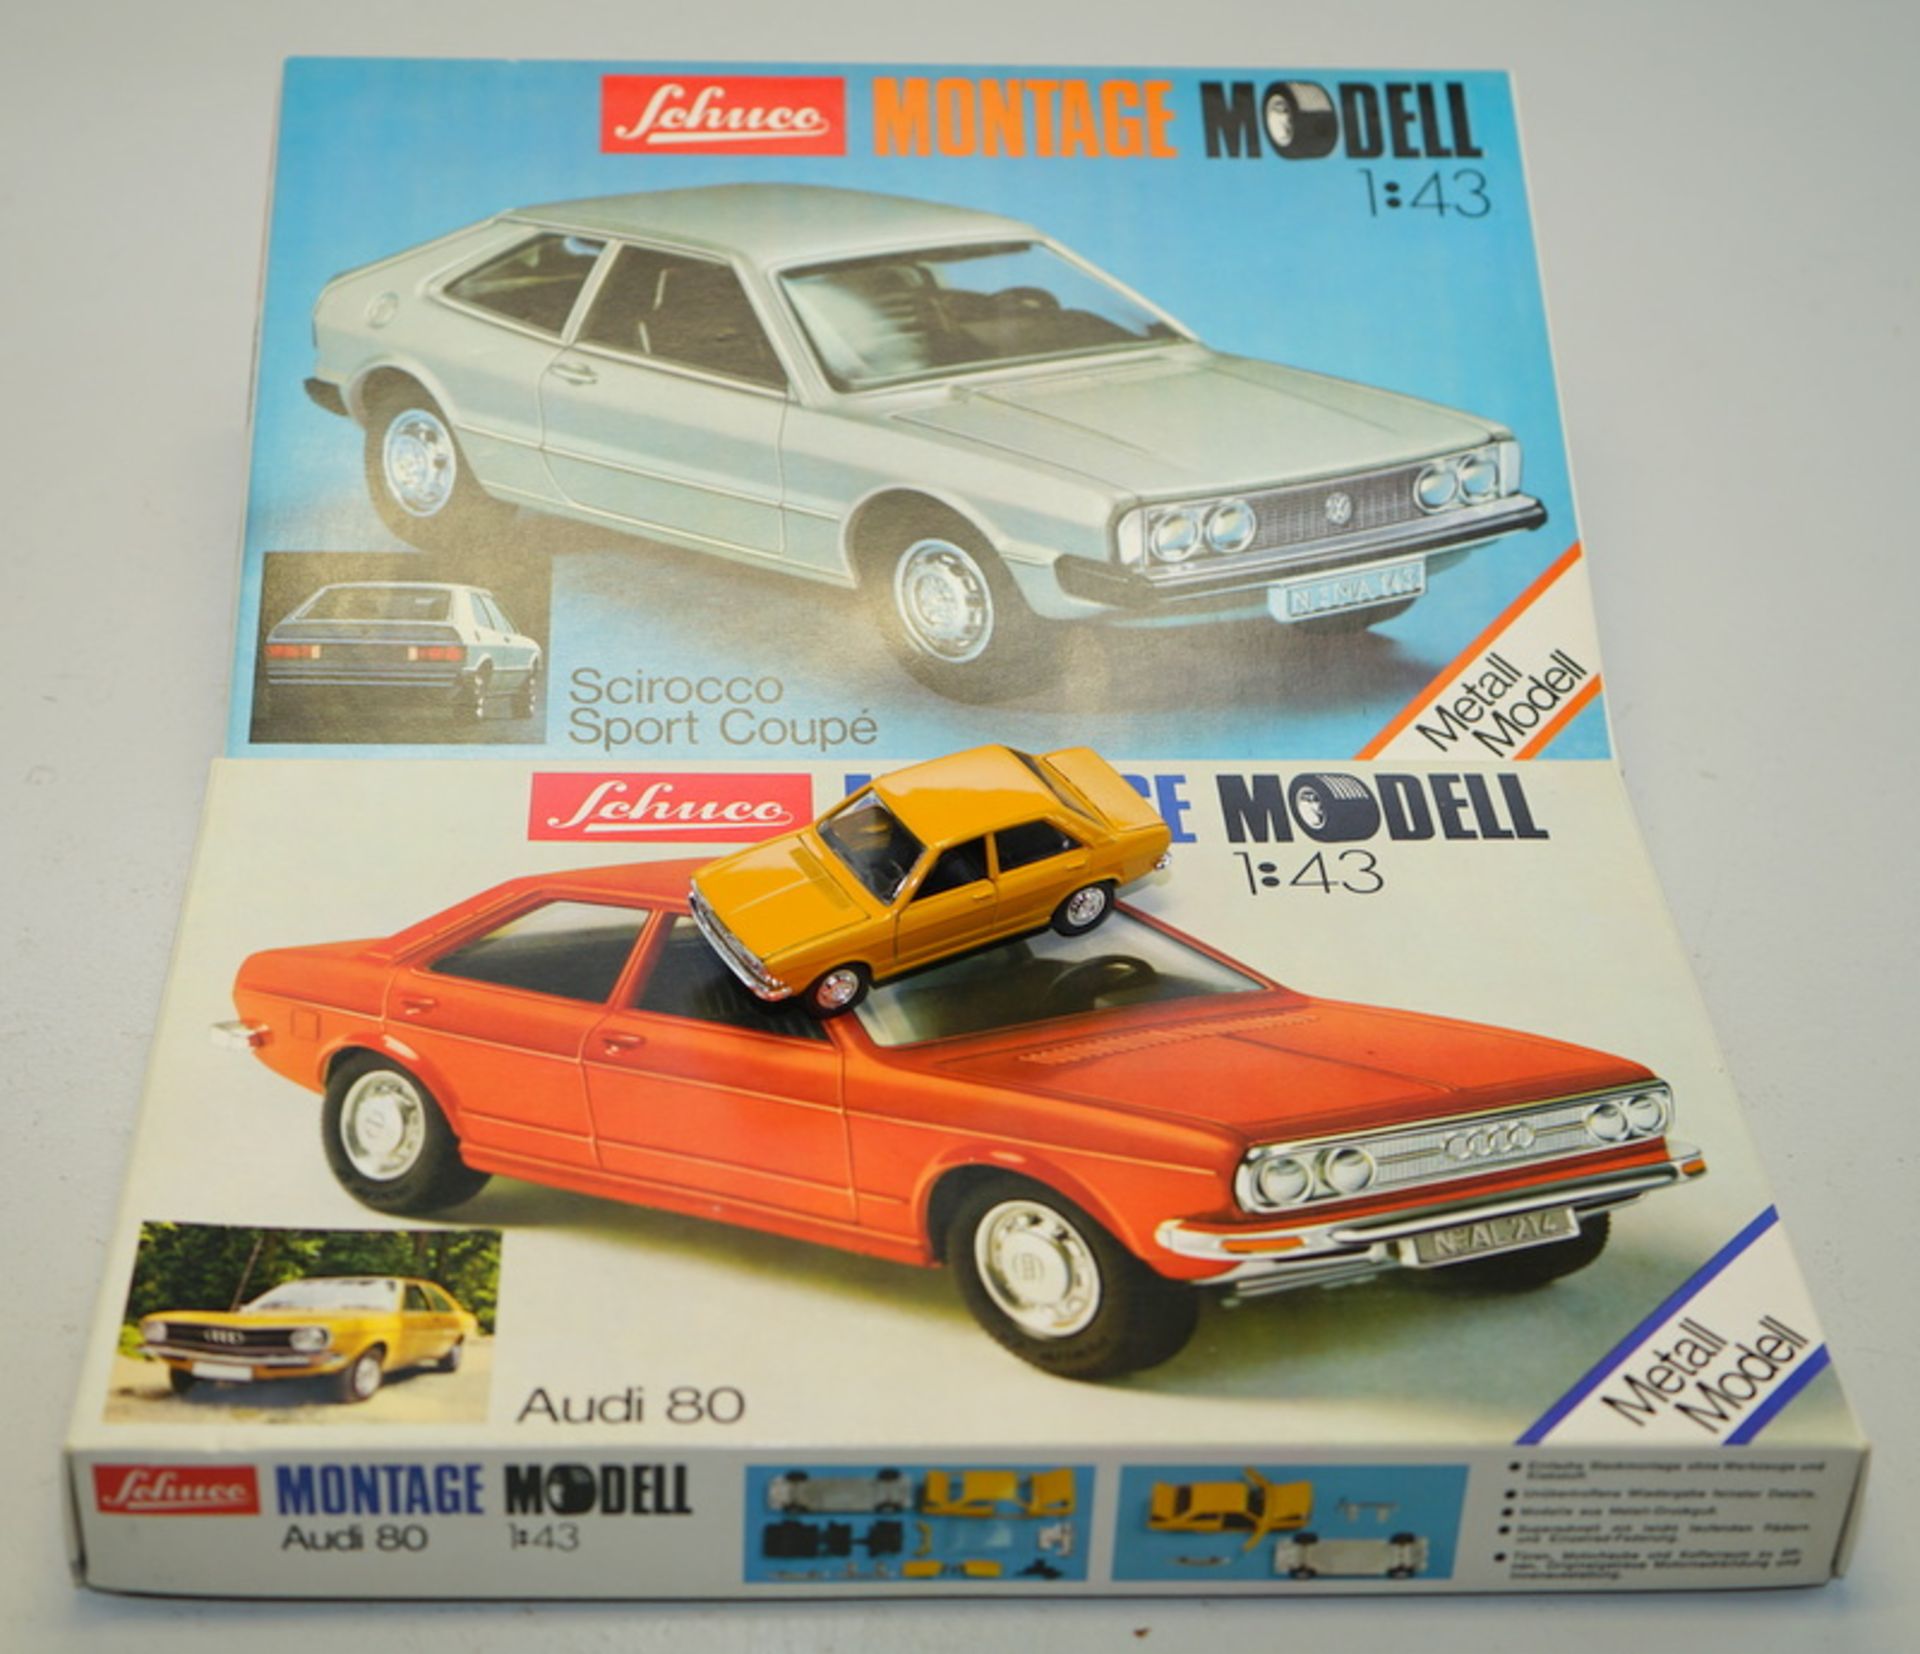 2x Schuco Montage-Modelle sowie 1x Audi 80-Modell, 1:43 - Image 2 of 2